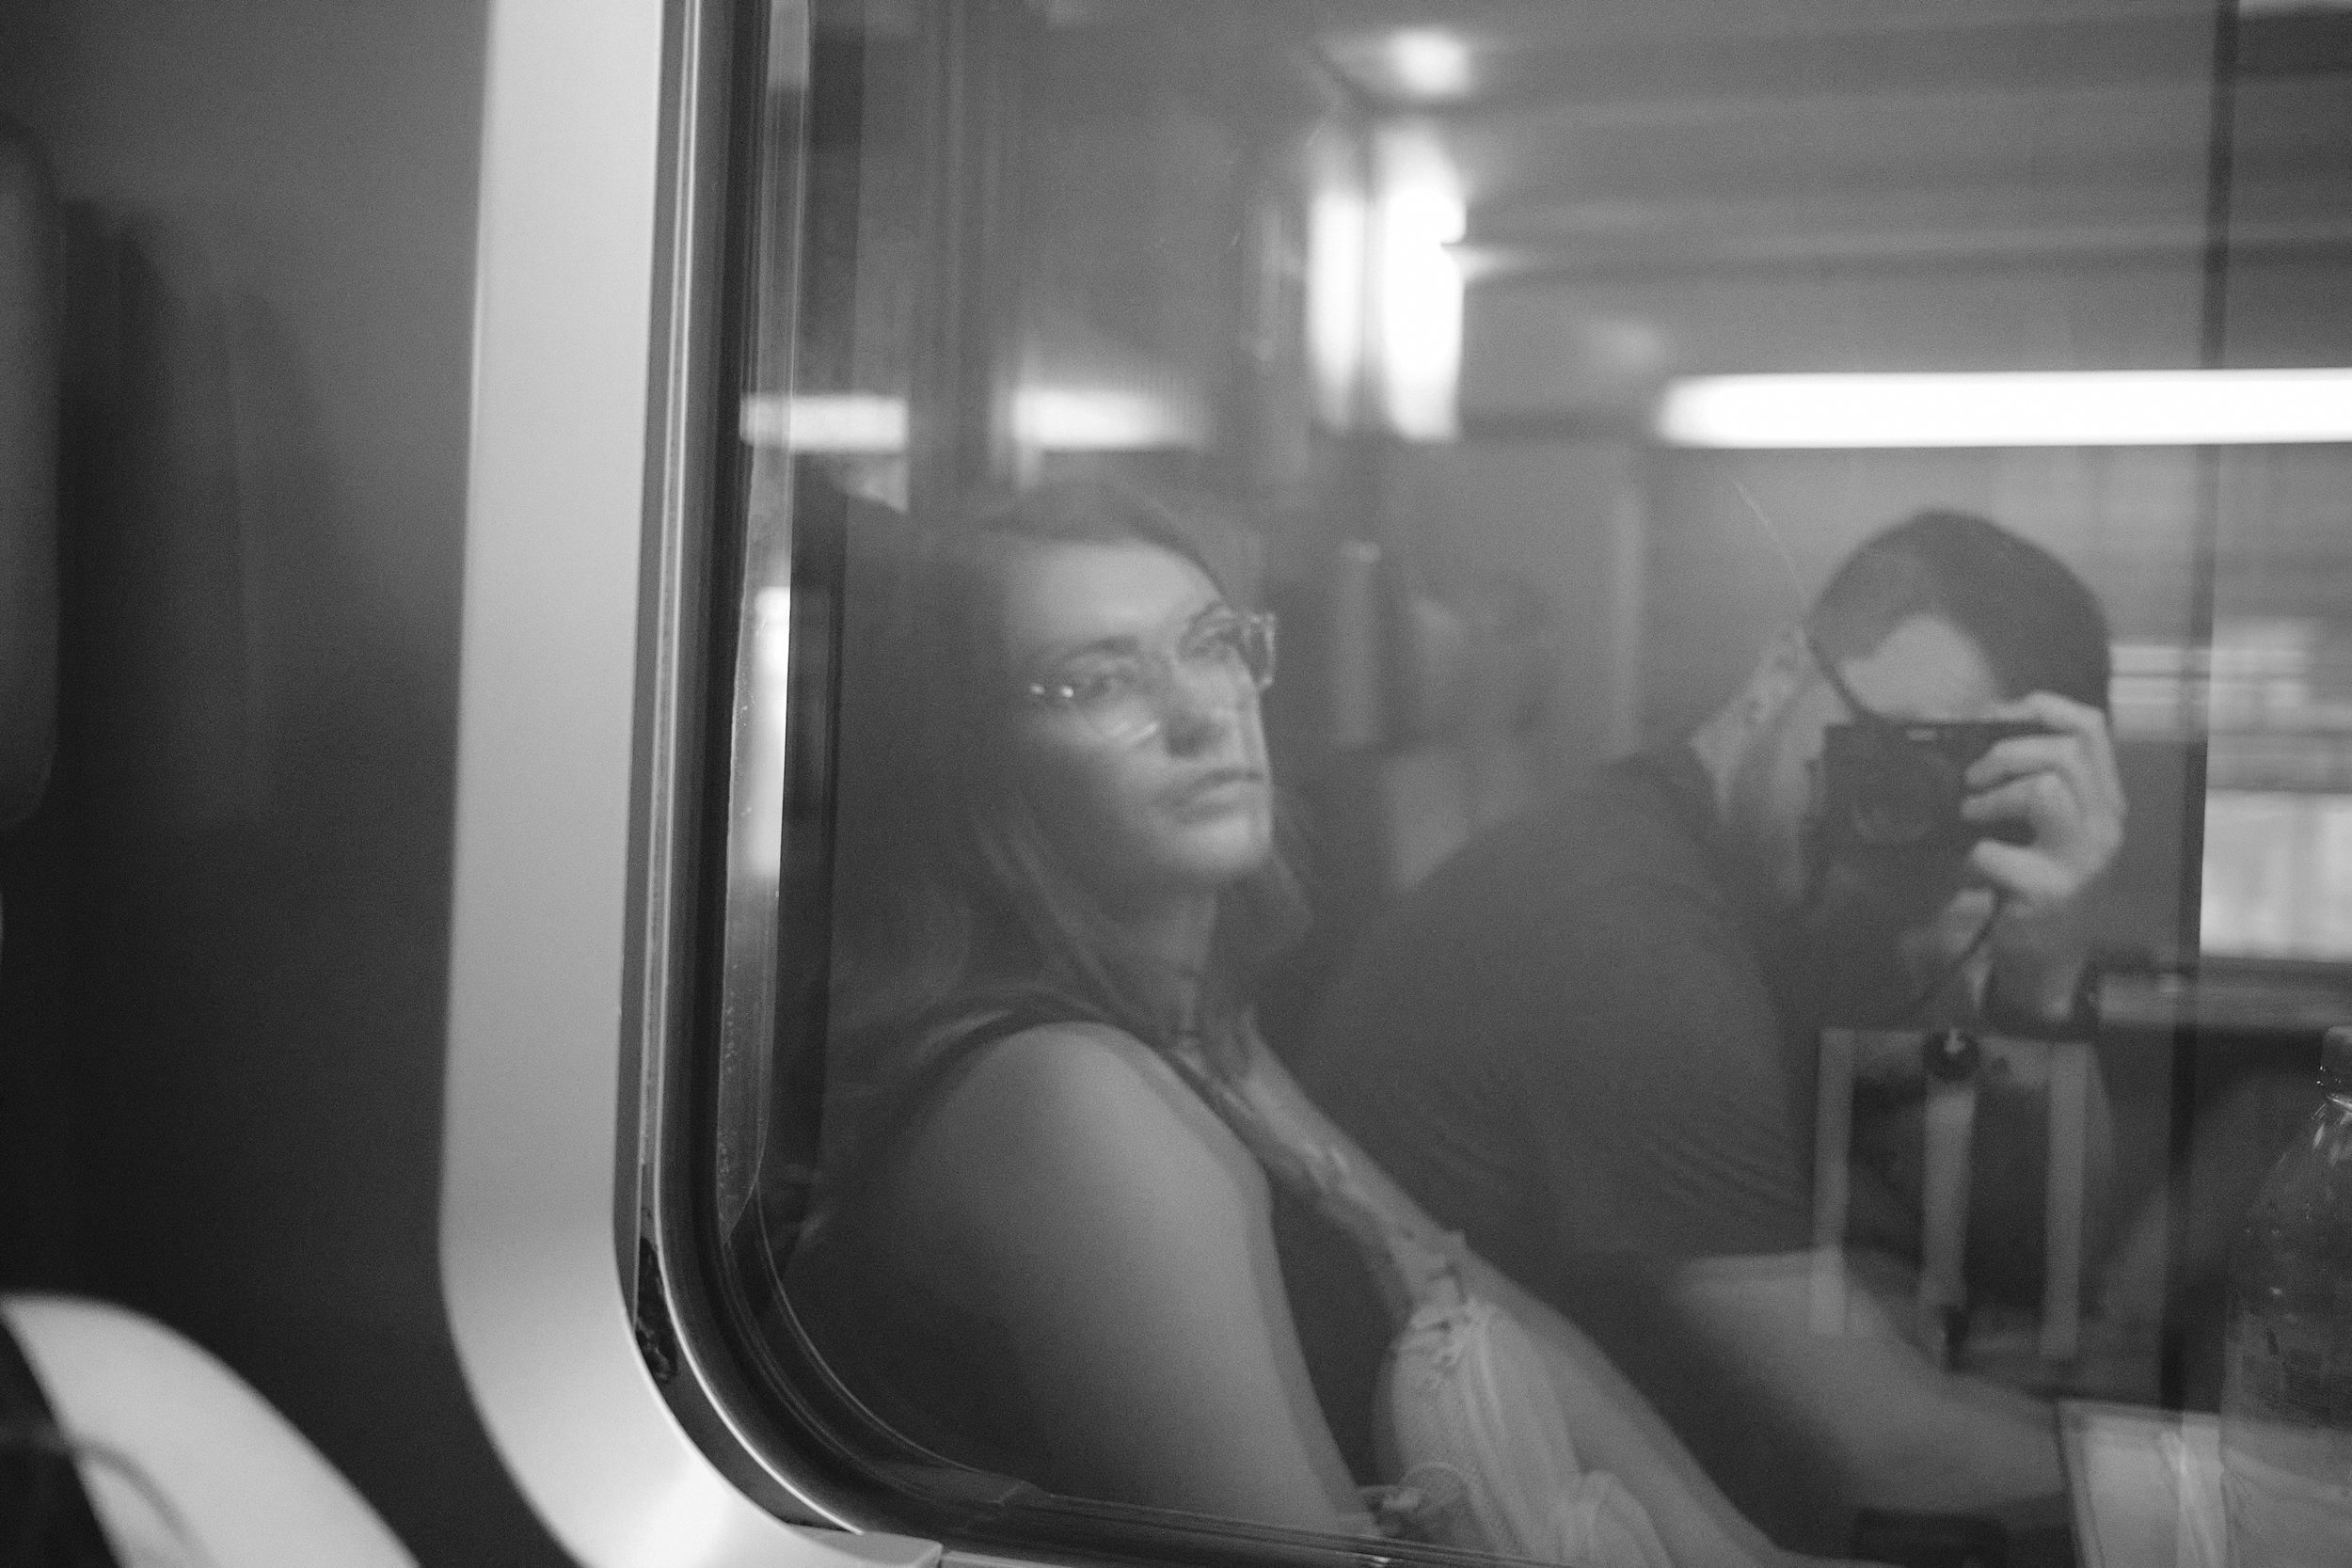 In Reflection: Connor and Krysta's Artistic Self-Portrait on a Paris Train